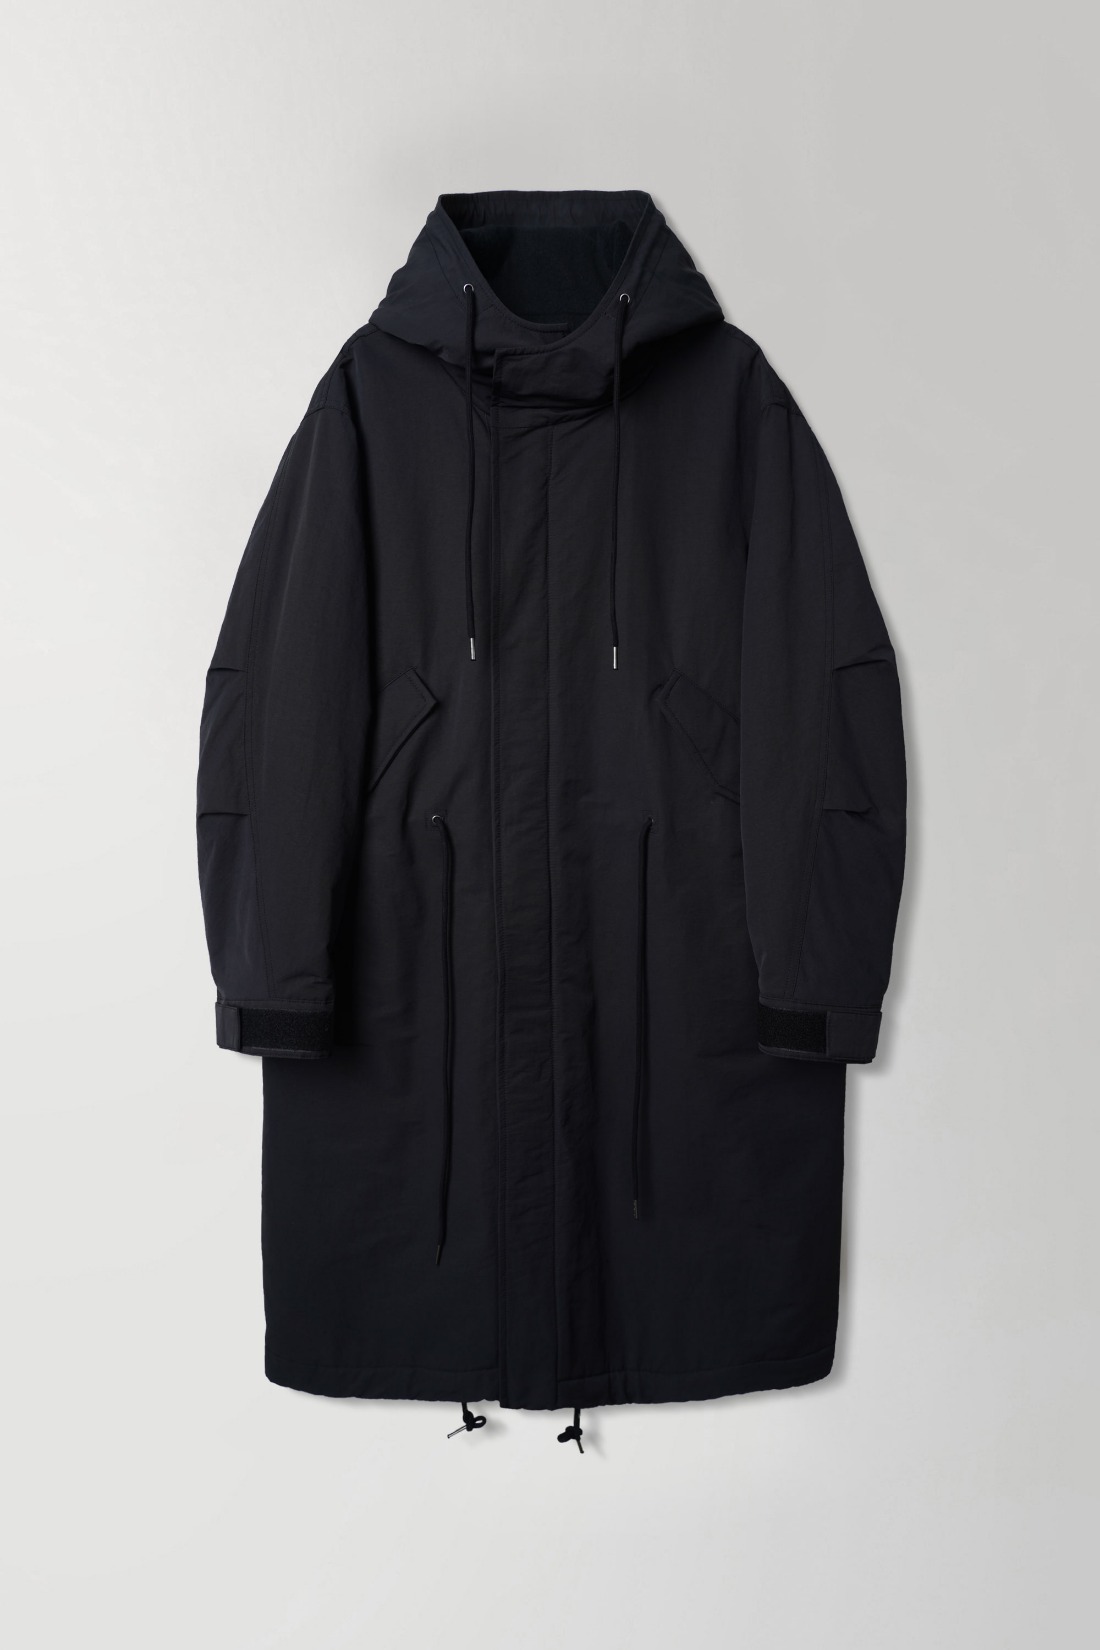 [INTHERAW] TECHNICAL LONG PARKA BLACK